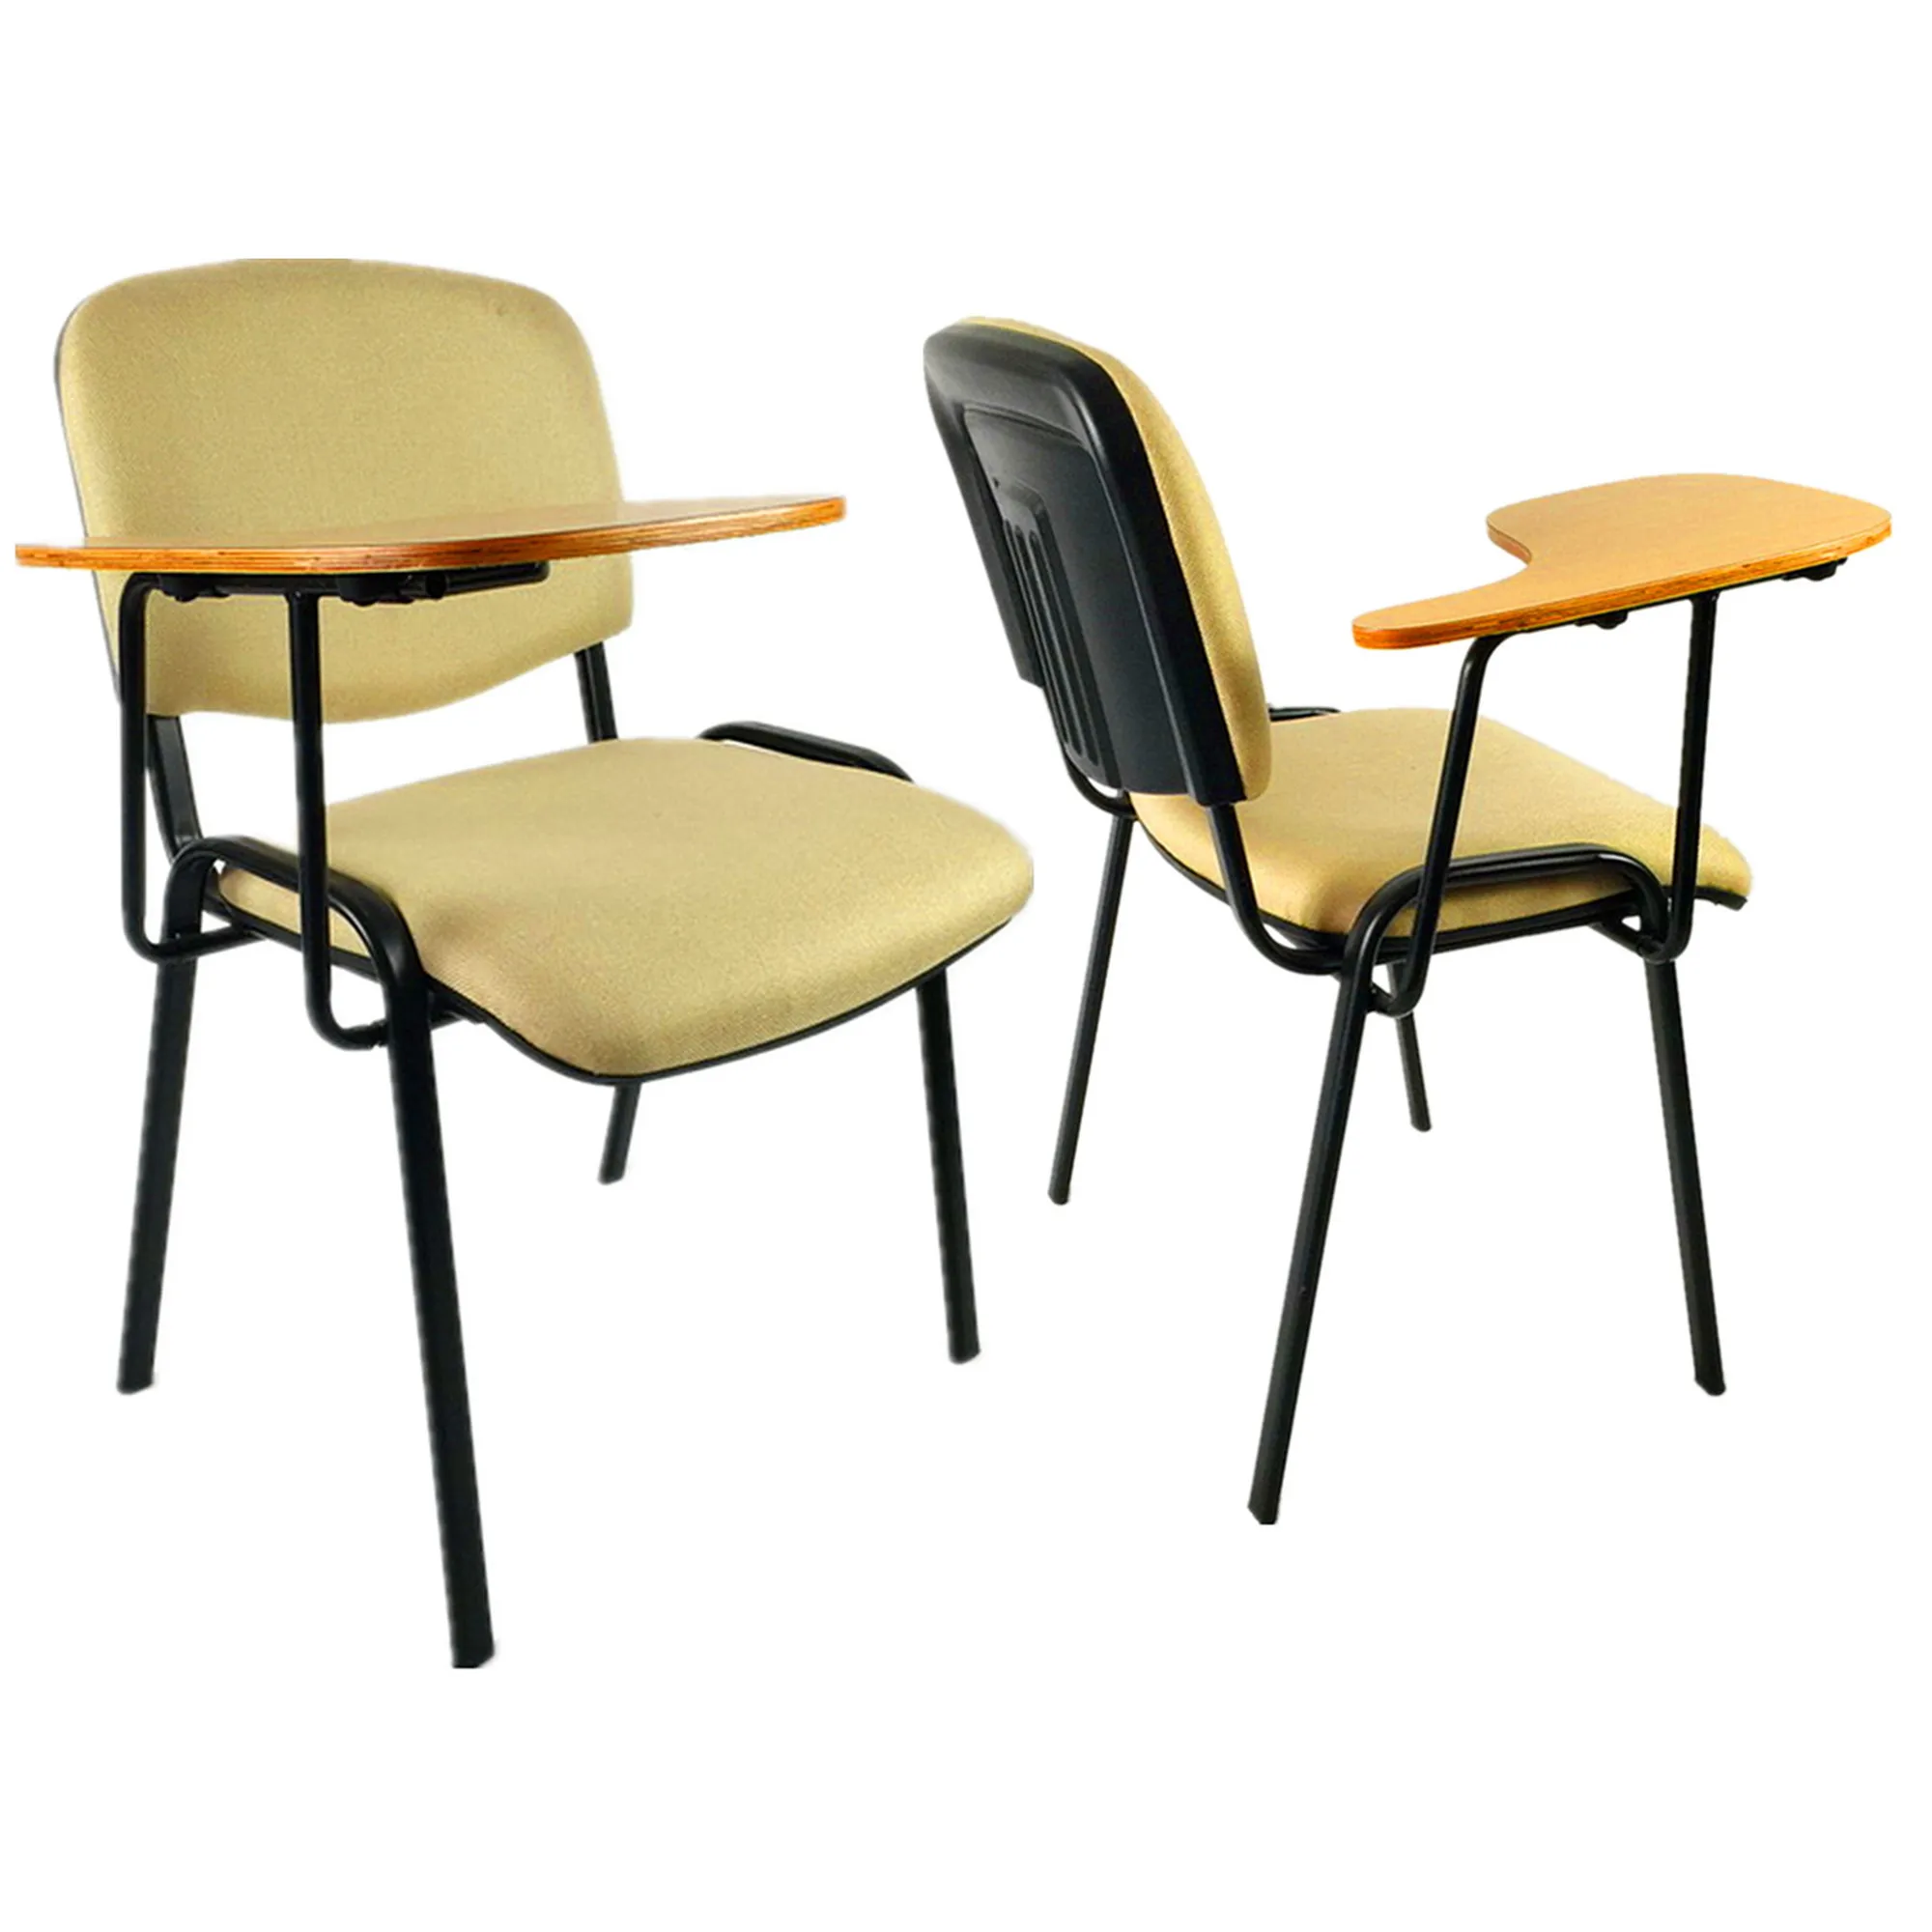 School Chairs With Writing Pad Tables Attached Buy School Chairs With Arm